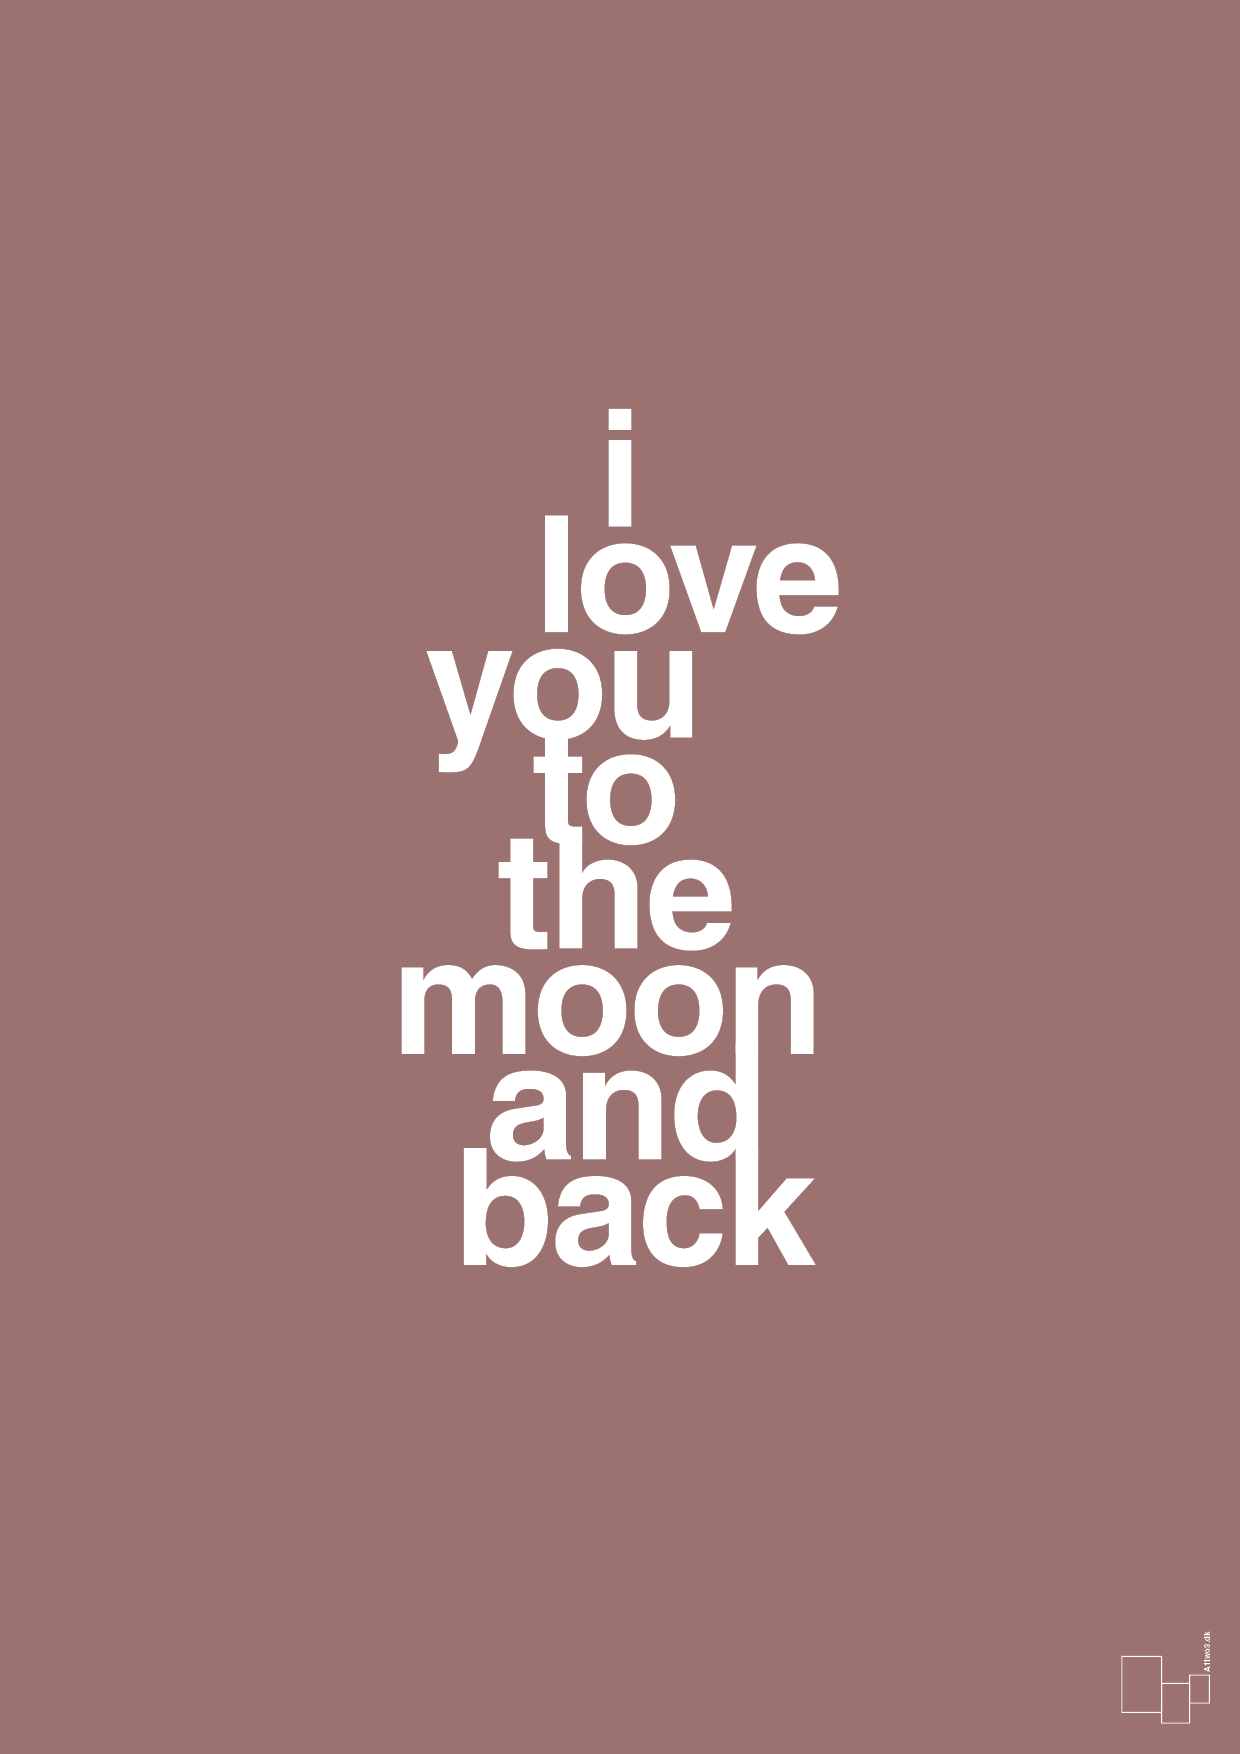 i love you to the moon and back - Plakat med Ordsprog i Plum